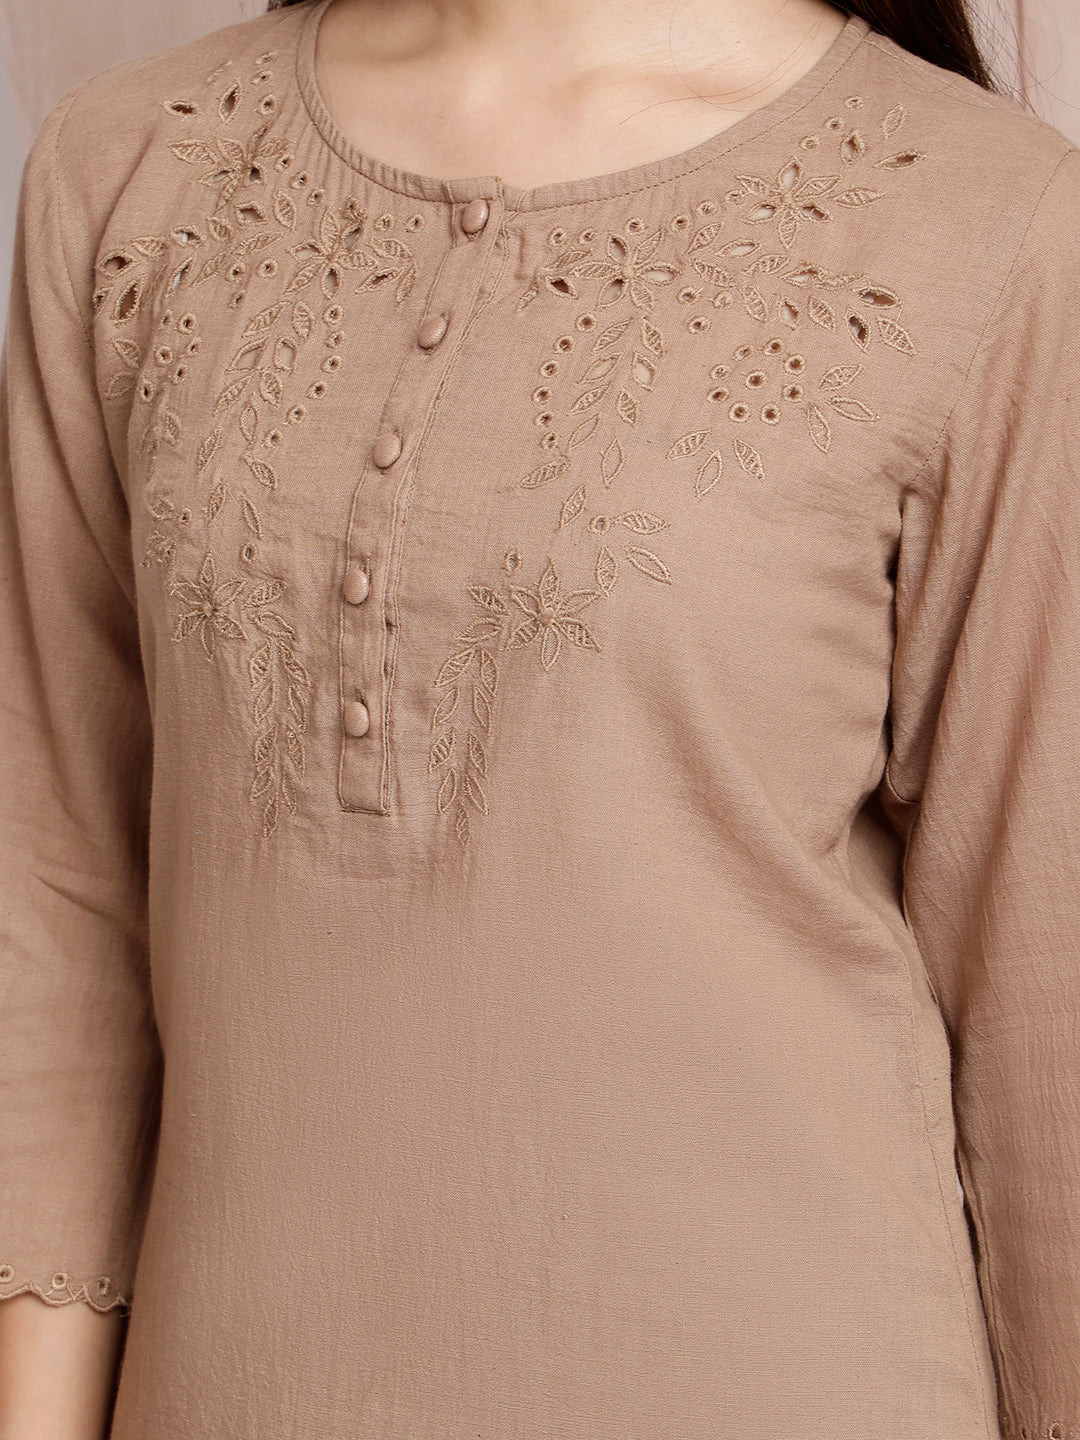 BROWN CUTWORK EMBROIDERED COTTON KURTA WITH PANTS